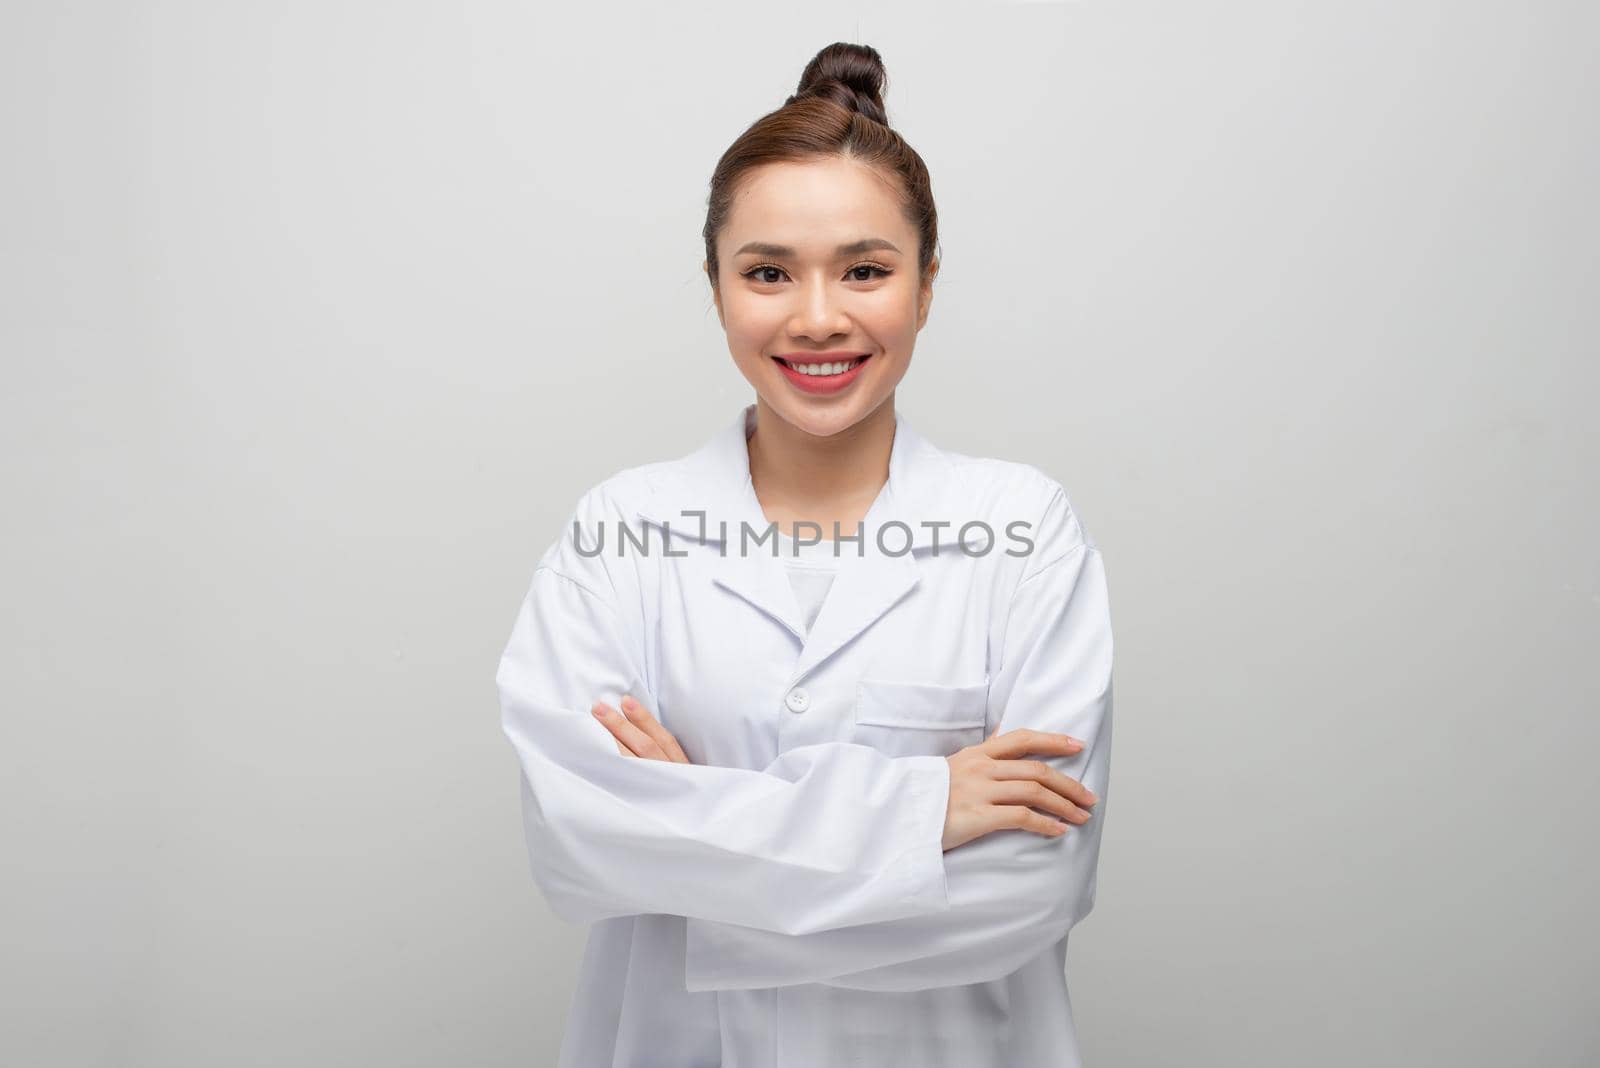 Young doctor woman wearing coat standing over isolated white background with a happy and cool smile on face.